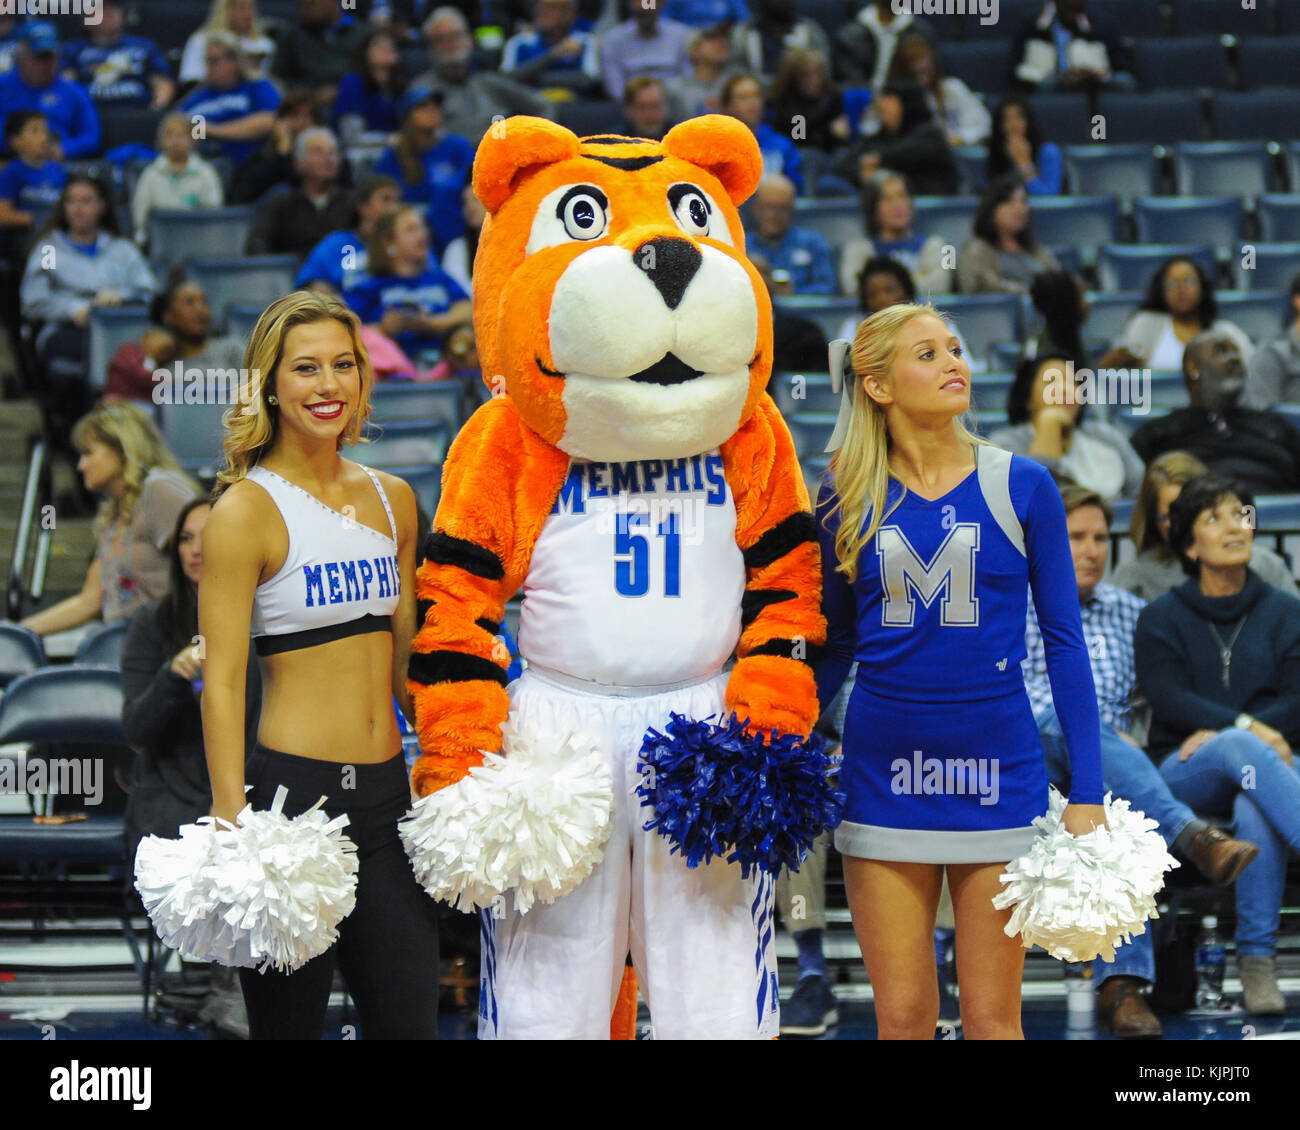 November 25, 2017; Memphis, TN, USA; Memphis Tigers Mascot, POUNCER, and  cheerleaders performing during an intermission in NCAA D1 basketball action  against NKU. The Memphis Tigers defeated the Northern Kentucky Norse, 76-74.